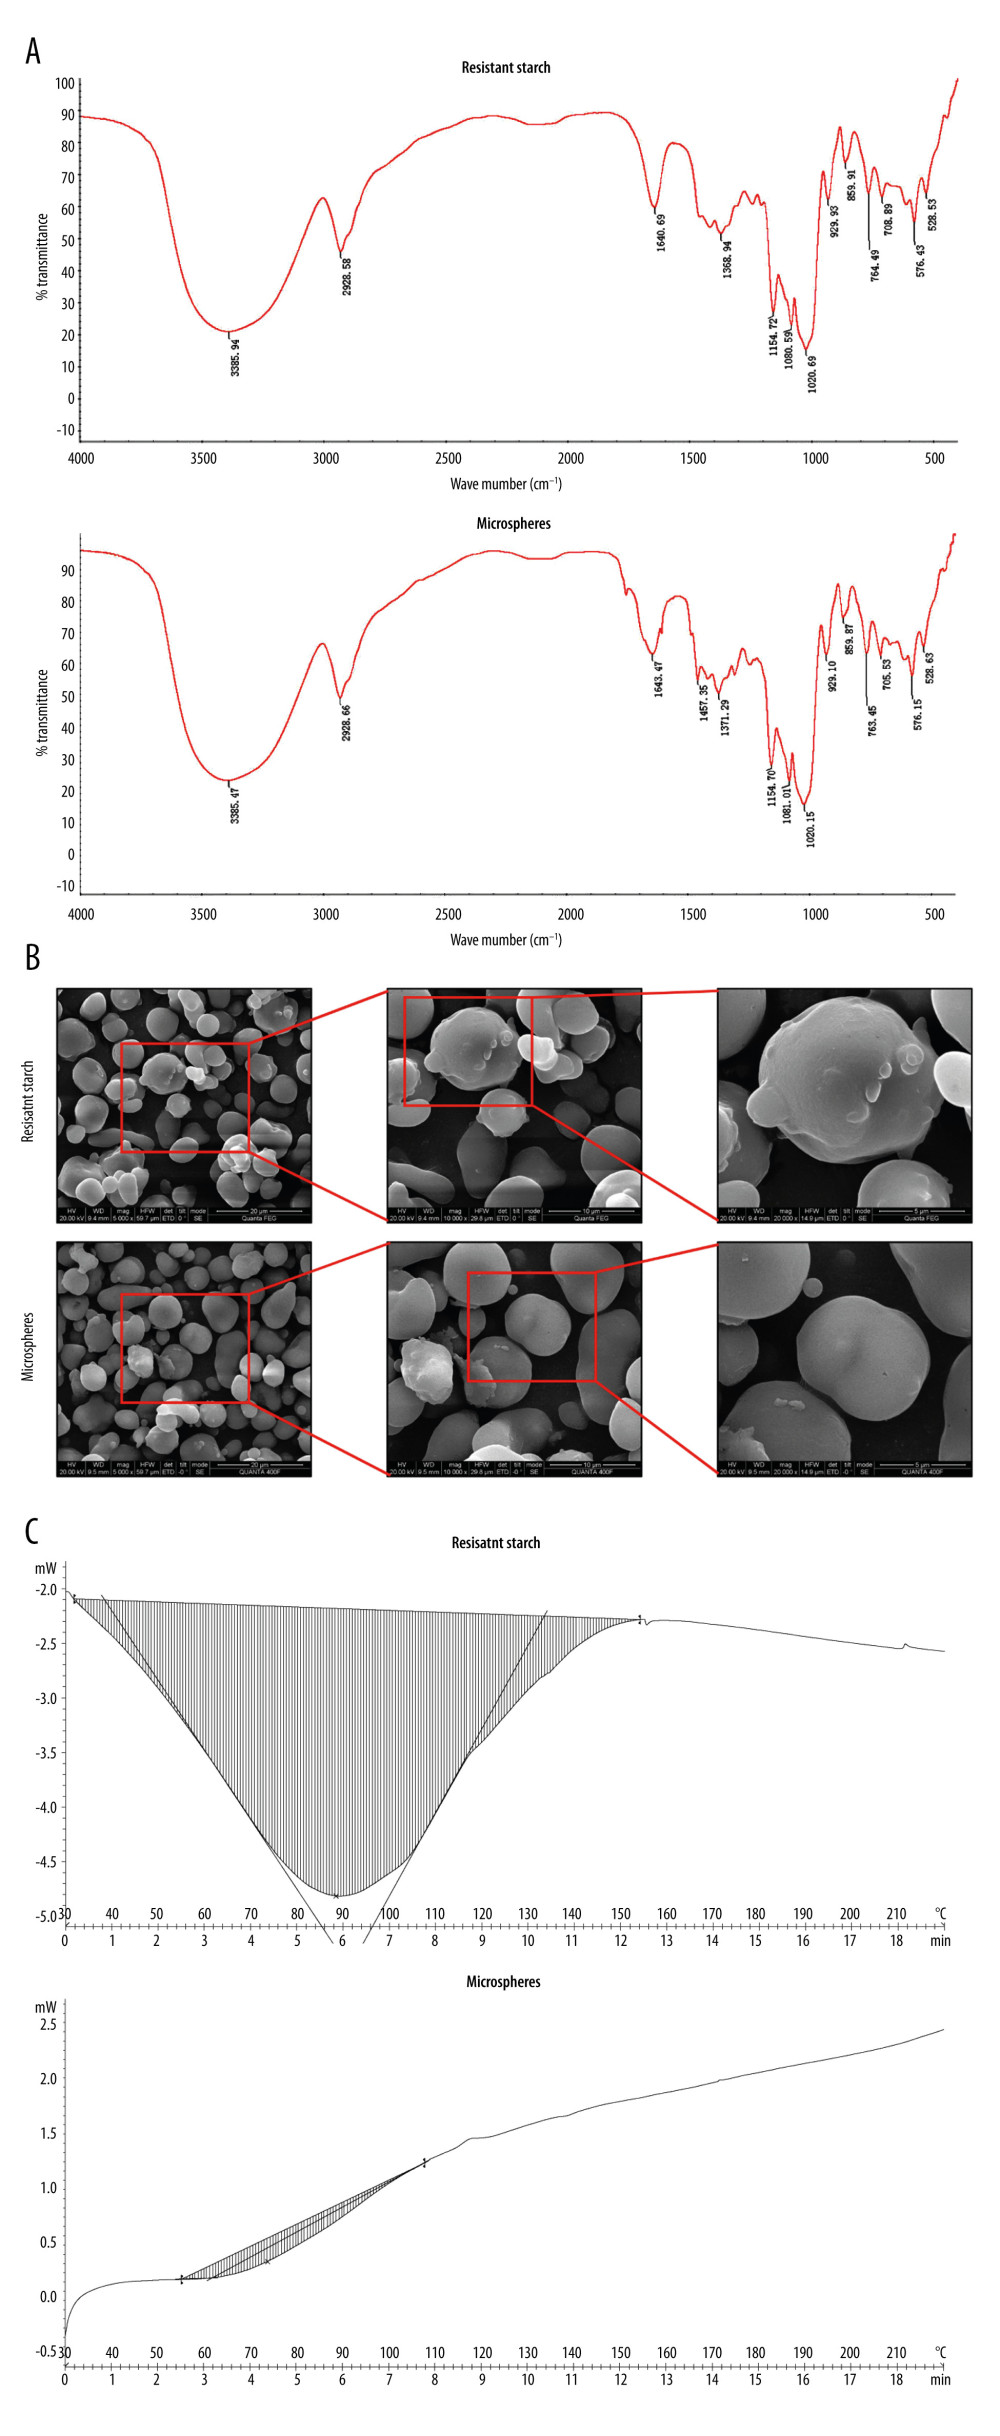 Structural and thermodynamic analysis of drug-loaded microspheres. Analysis of the resistant starch and drug-loaded microspheres. (A) Fourier transform infrared spectroscopy analysis, (B) scanning electron microscopy analysis, and (C) thermodynamic analysis.